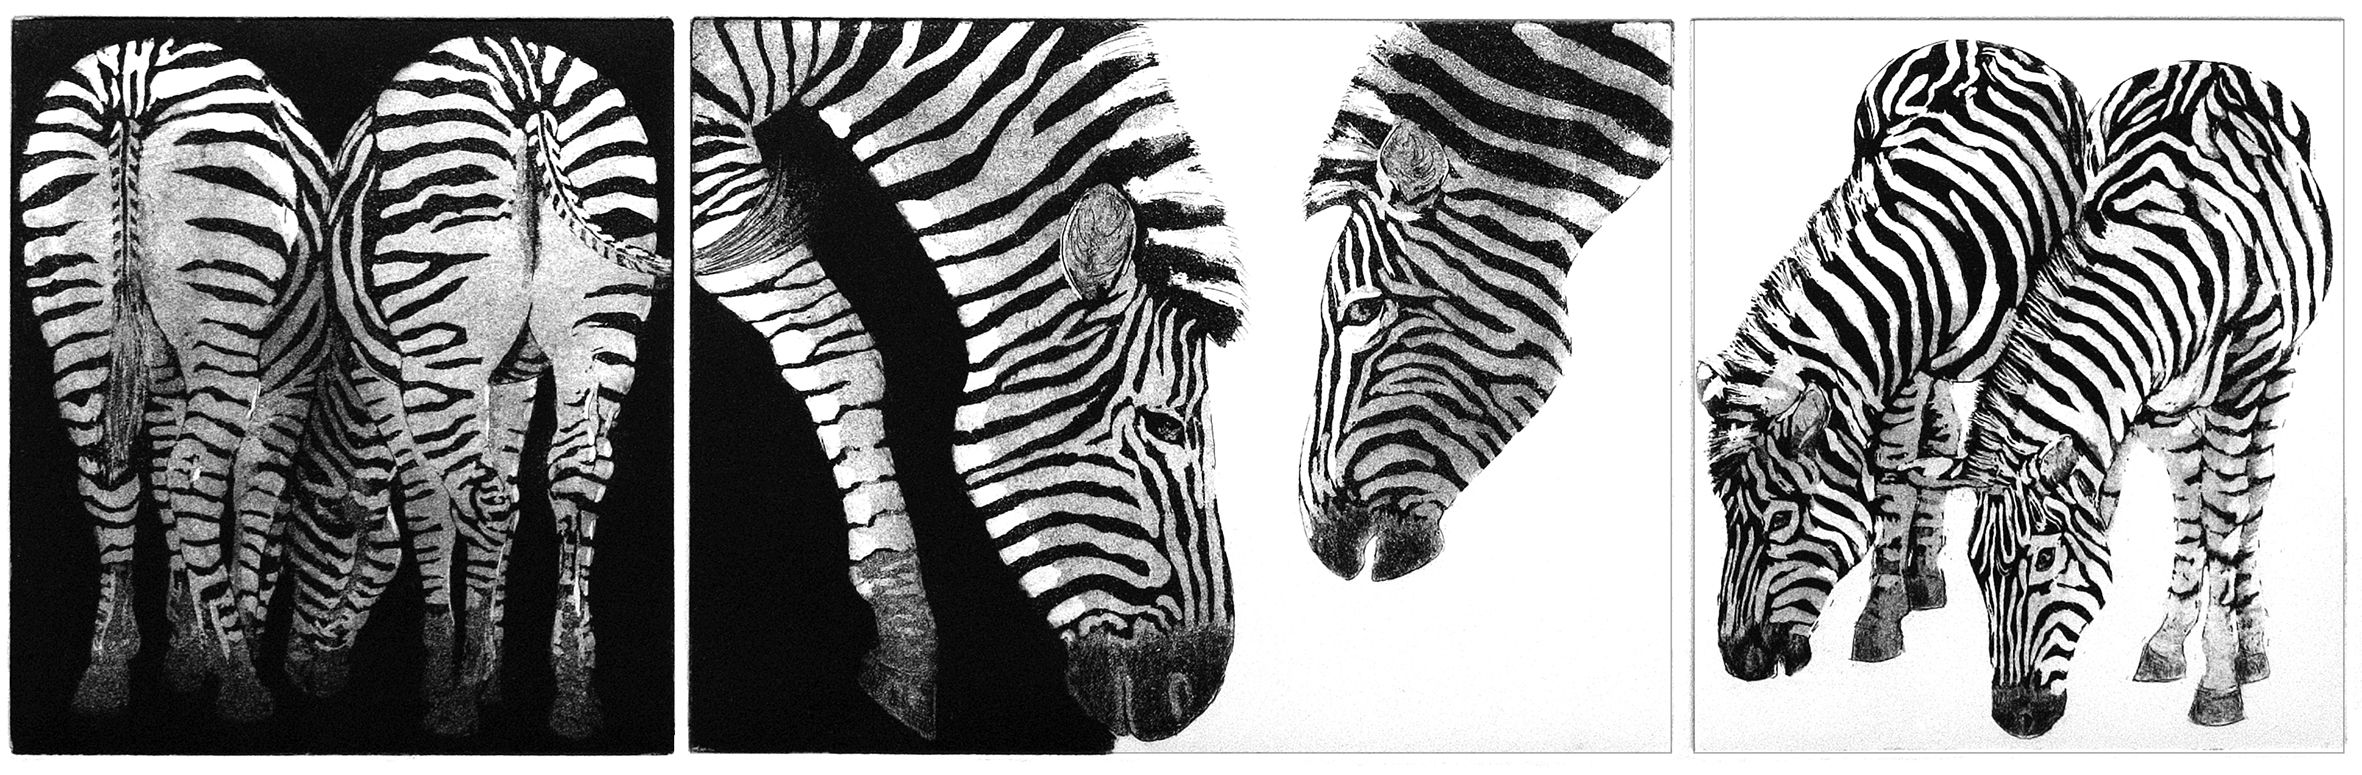 Black and white, white and black by Jane Peart